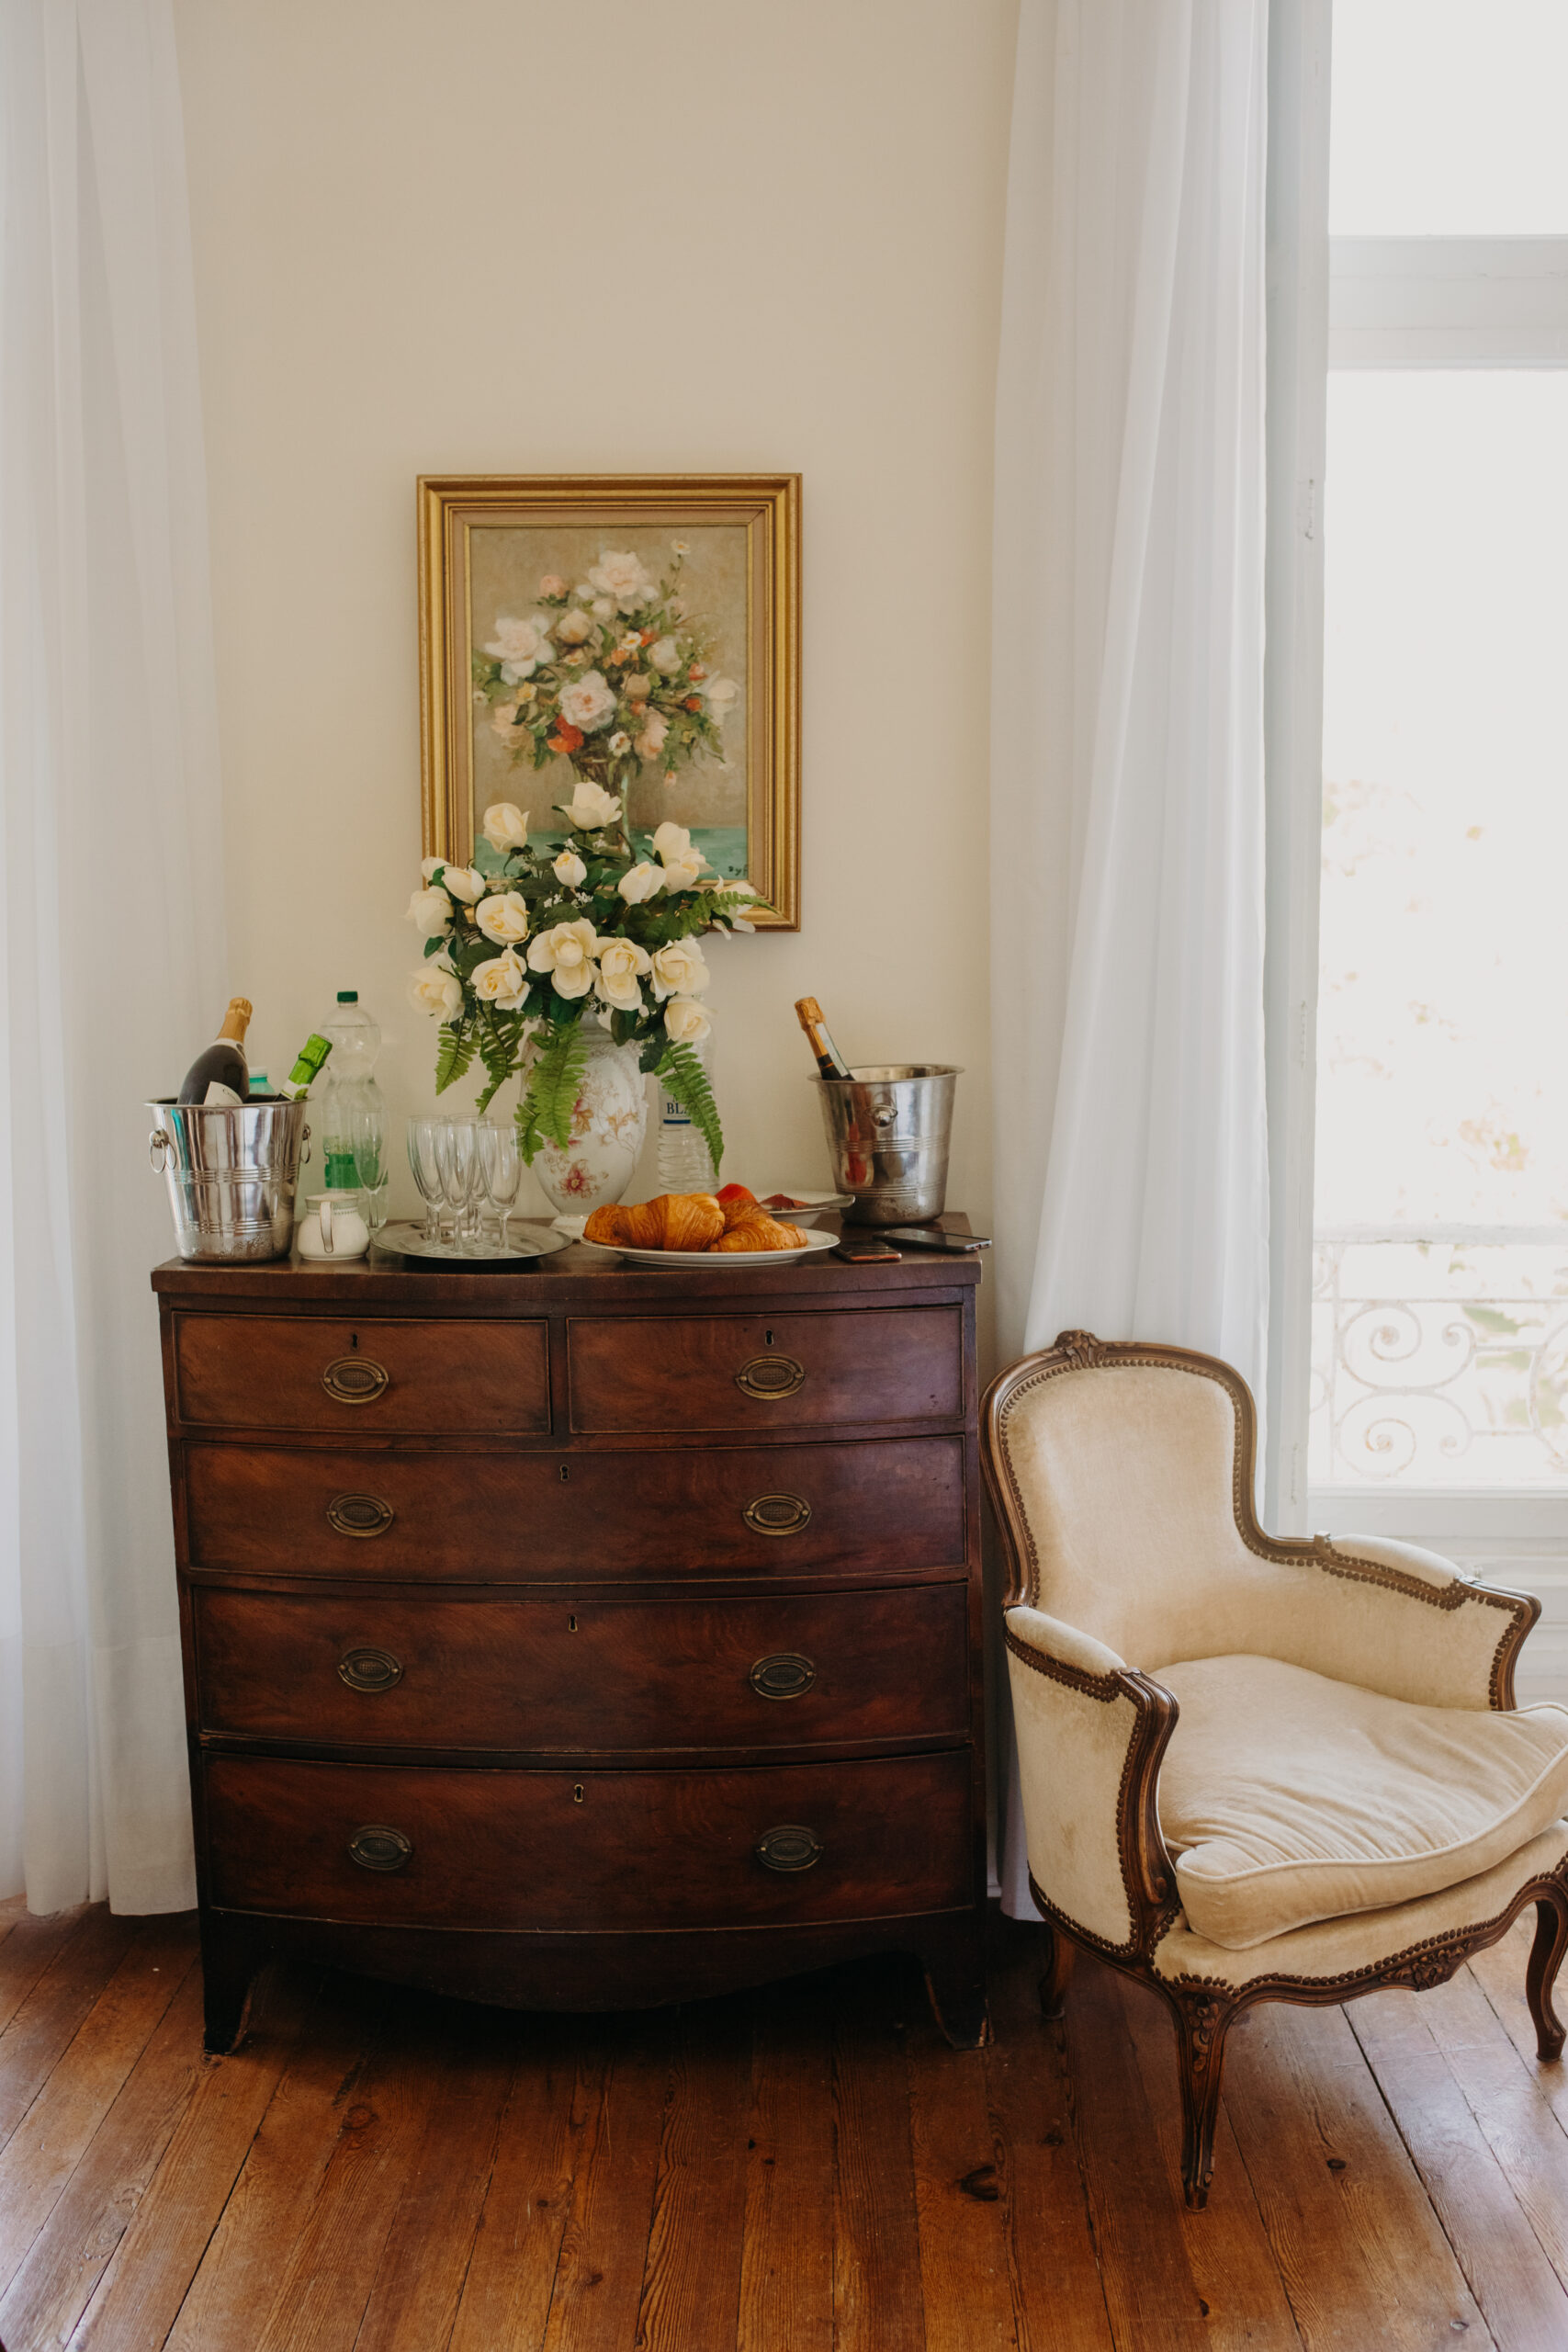 On a chest of drawers sits a flower bouquet with champagne in an ice bucket and croissants. 